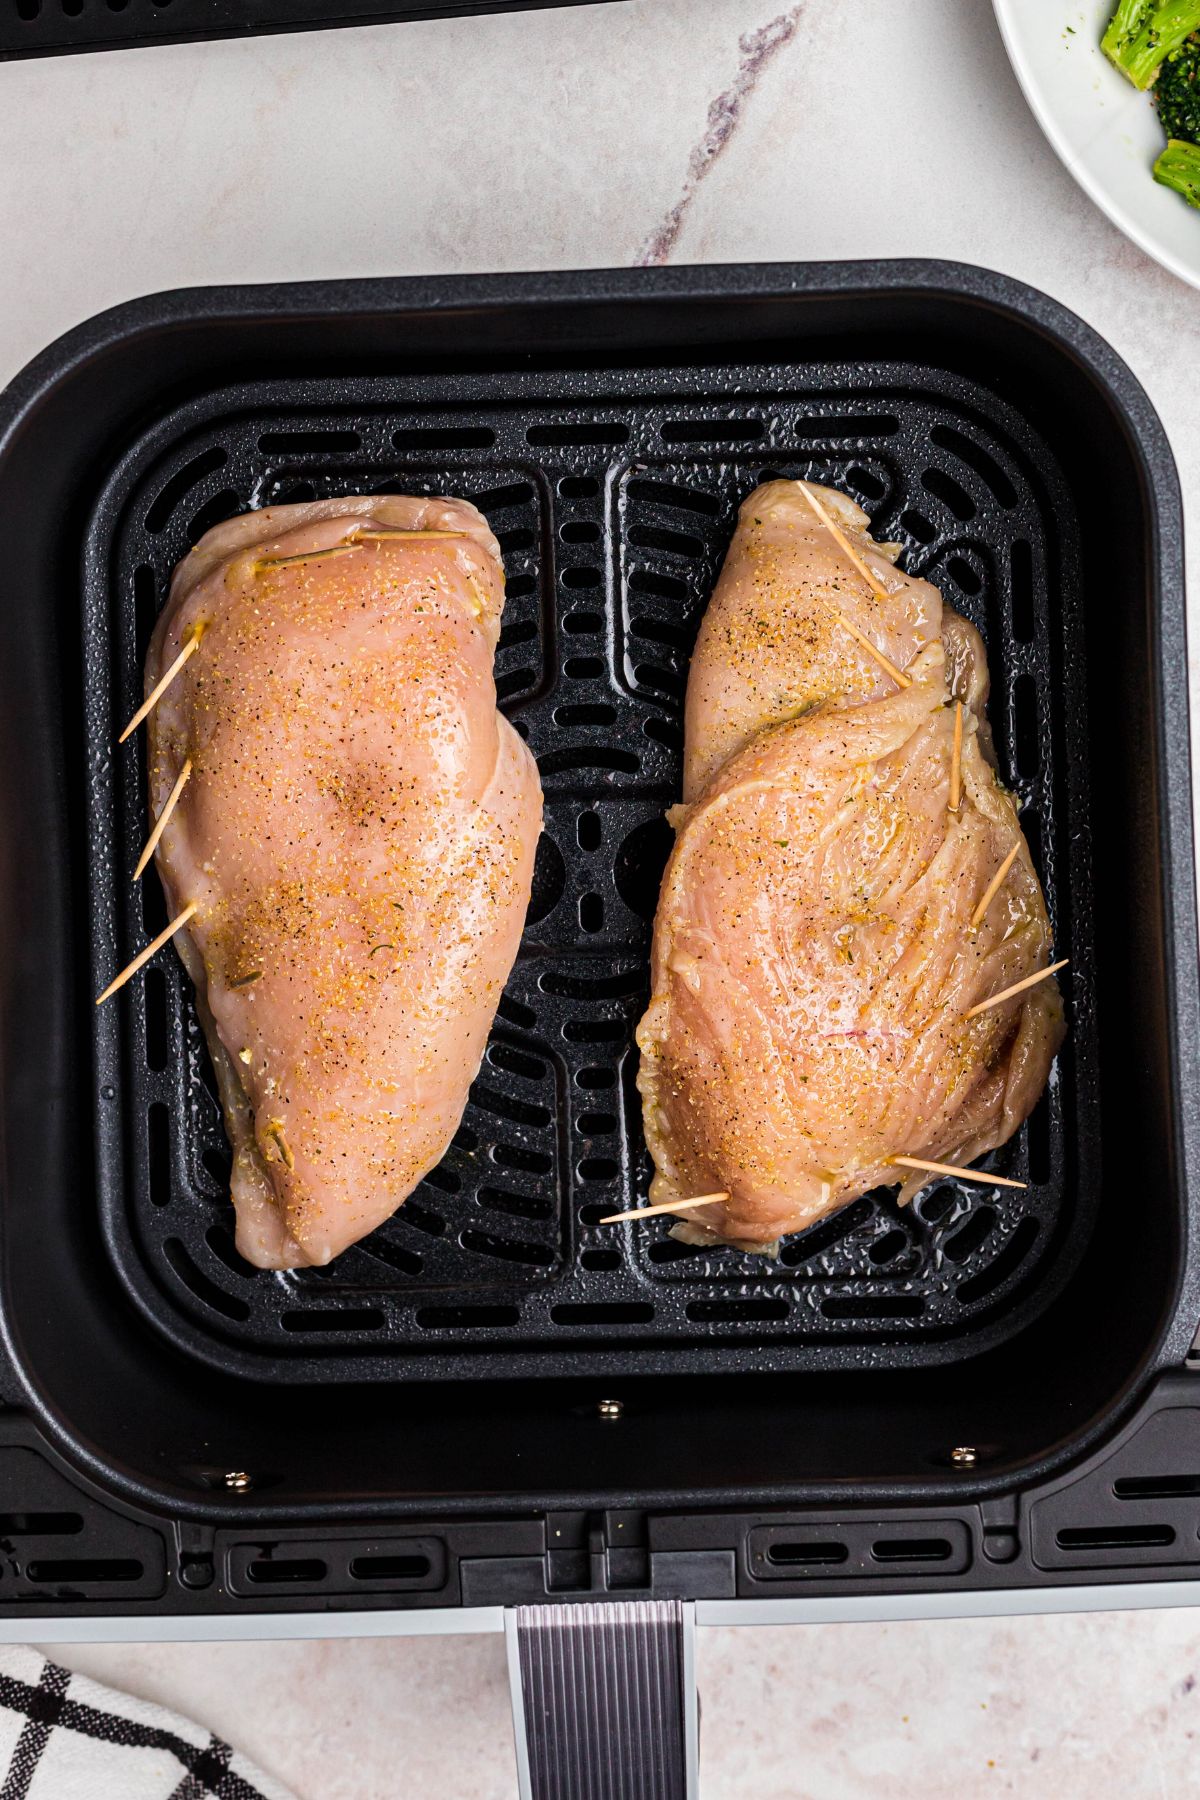 Uncooked stuffed chicken in the air fryer basket.